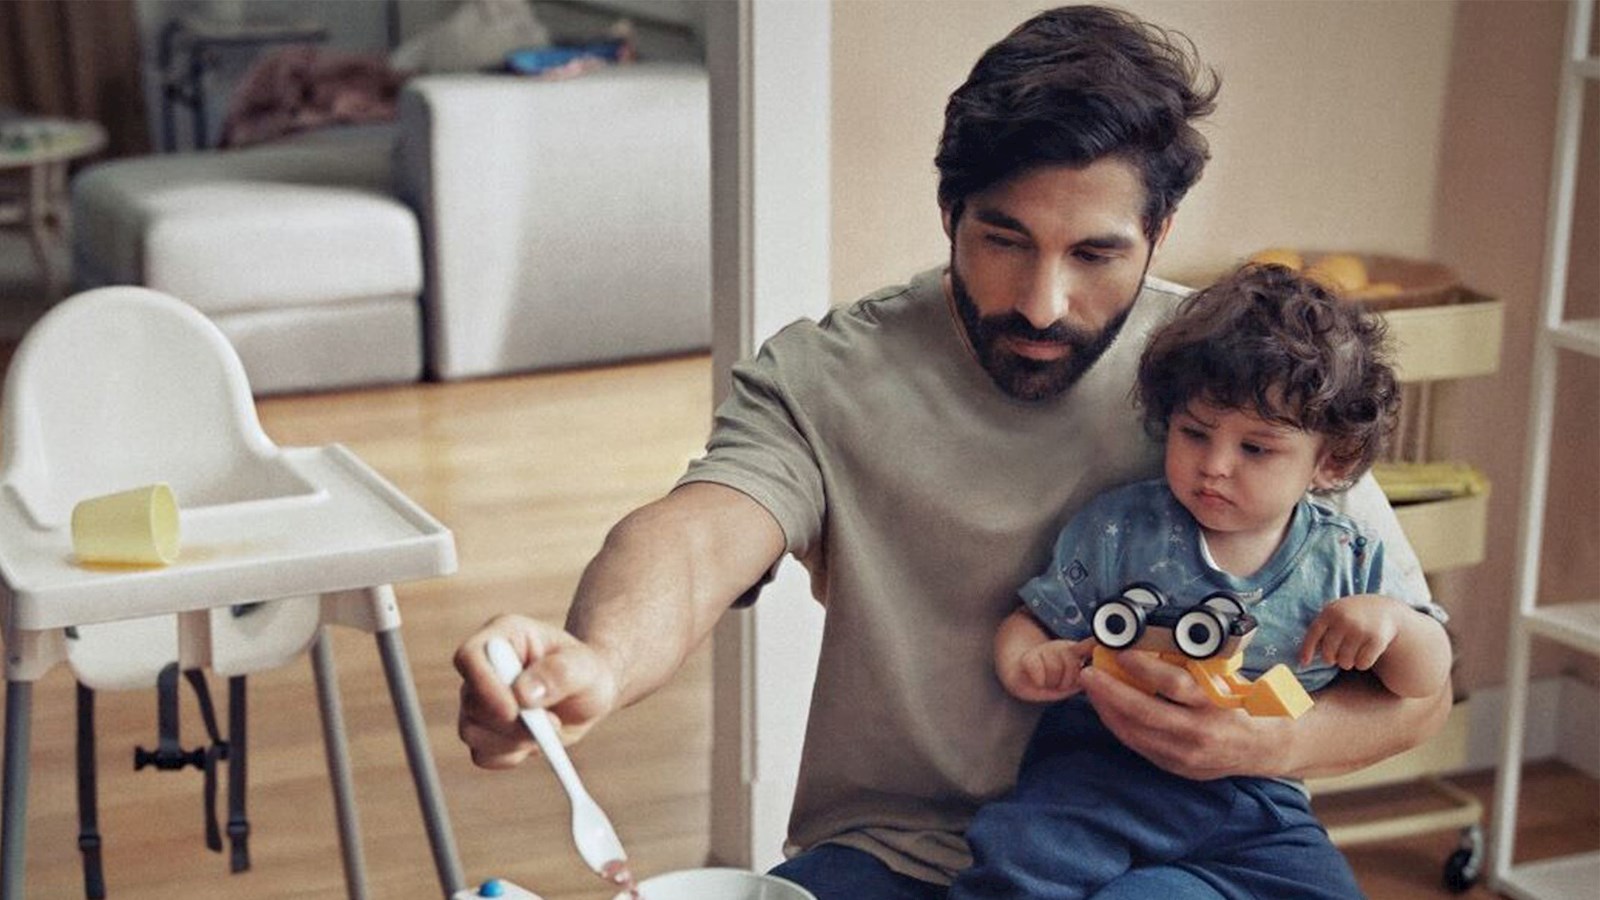 Man feeding a baby with IKEA ANTILOP highchair in background